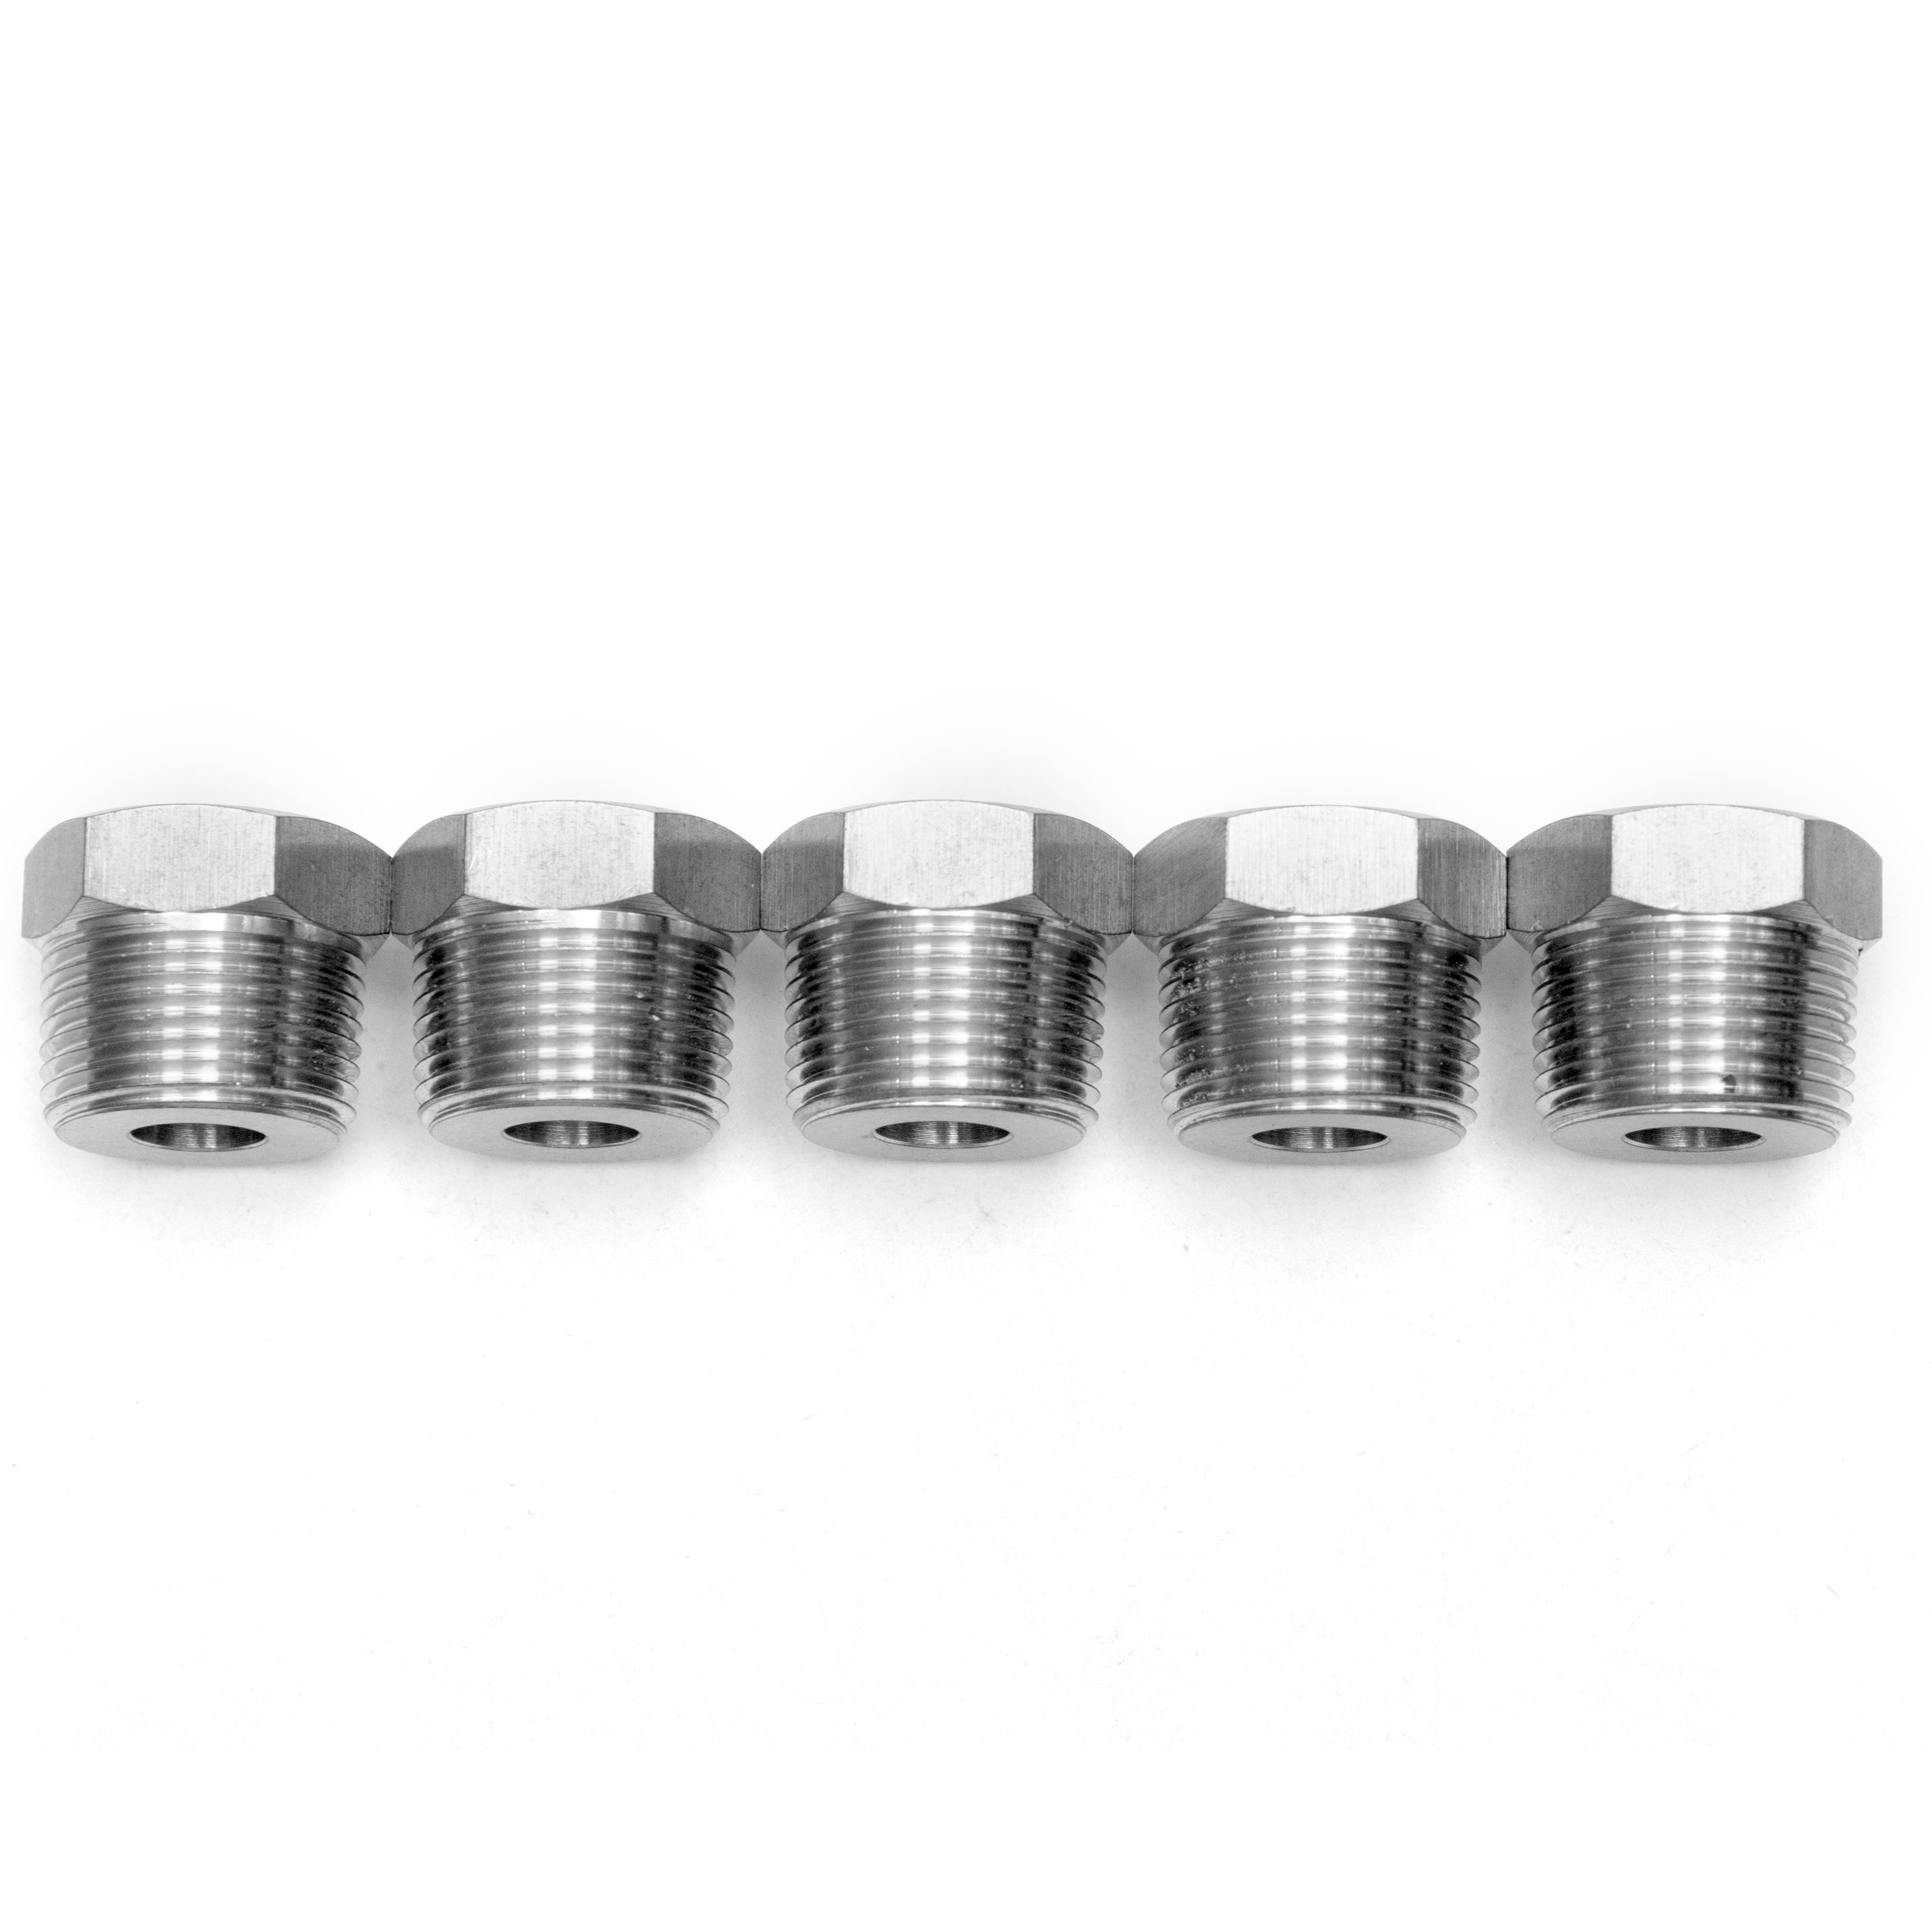 LTWFITTING Bar Production Stainless Steel 316 Pipe Hex Bushing Reducer Fittings 3/4 Inch Male x 1/4 Inch Female NPT Fuel Water Boat (Pack of 5)